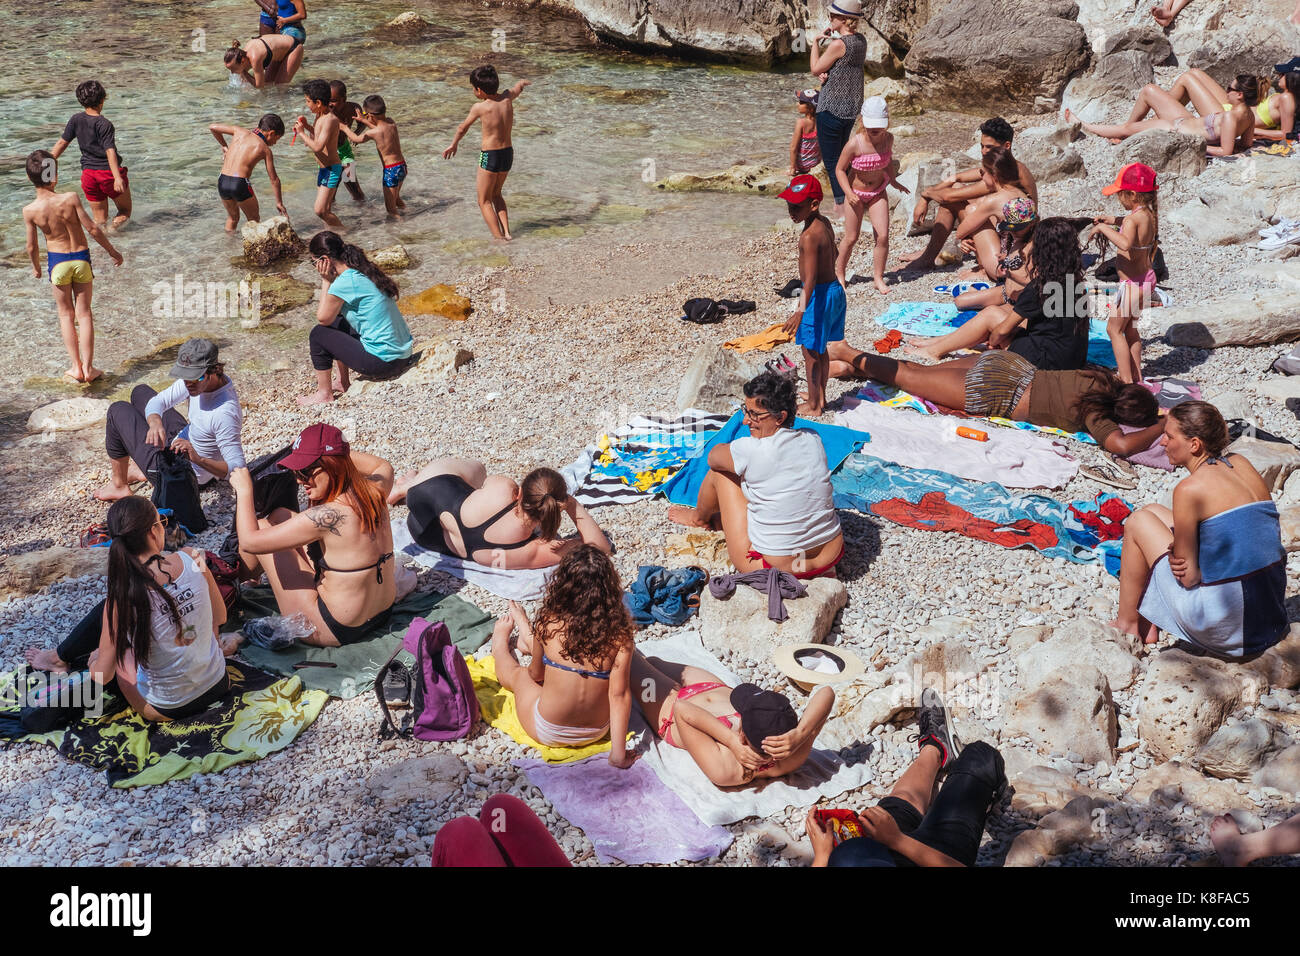 Crawded and small beach, Calanque de Sugiton,Calanques National Park, southern France Stock Photo